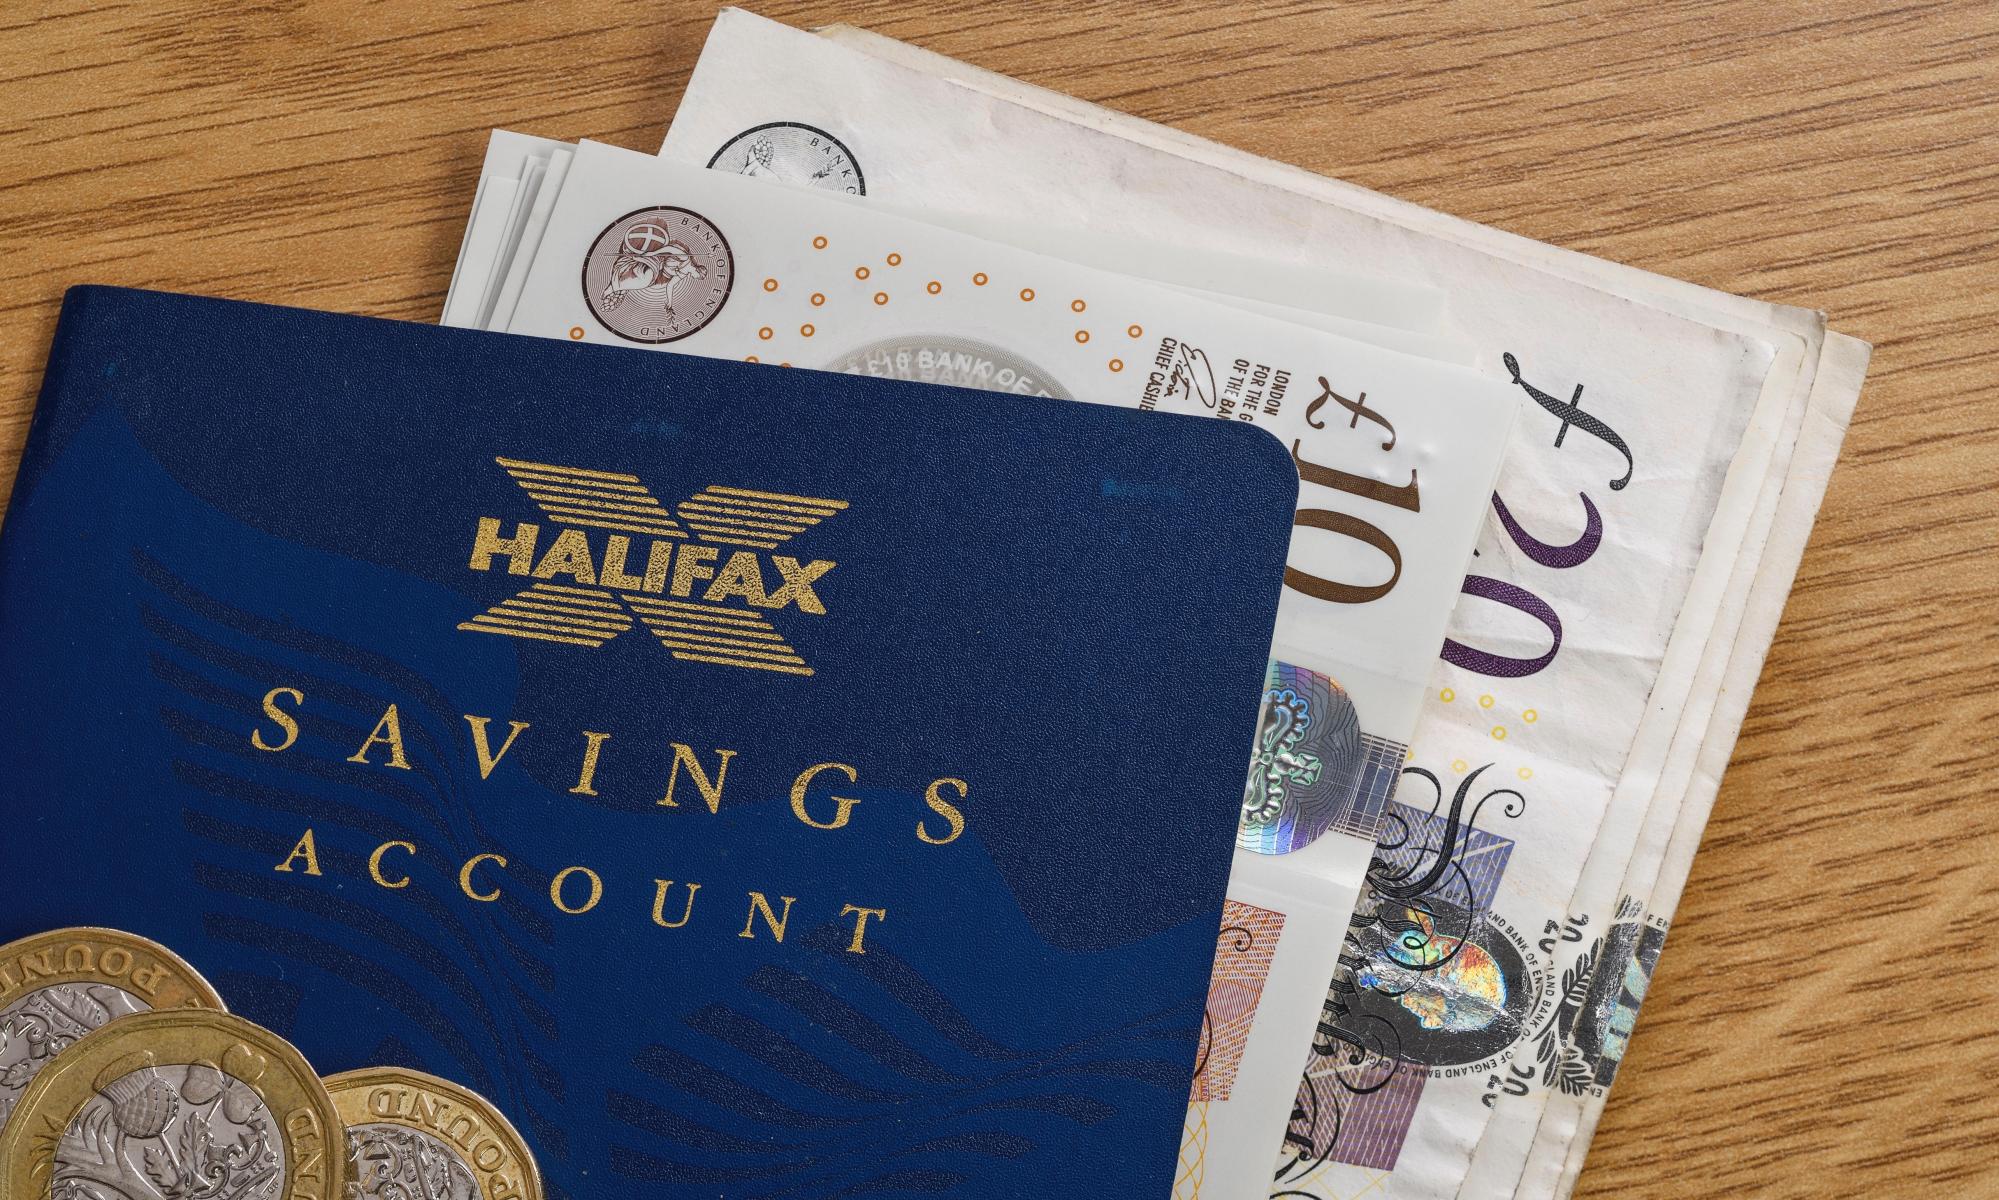 savings passbooks popular as britain turns to cash amid cost of living crisis